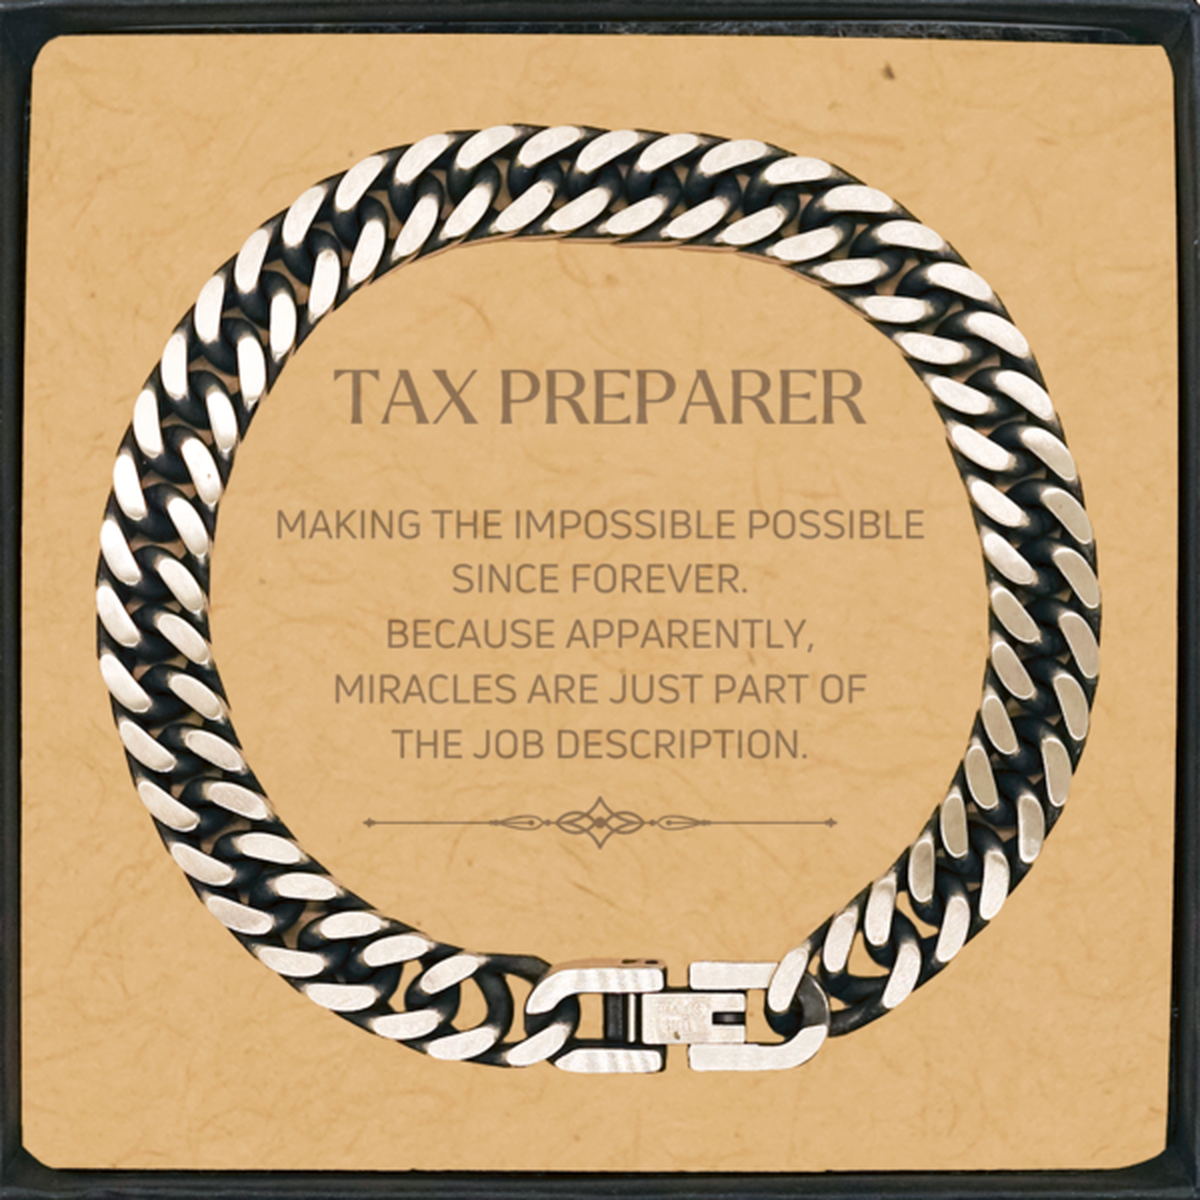 Funny Tax Preparer Gifts, Miracles are just part of the job description, Inspirational Birthday Cuban Link Chain Bracelet For Tax Preparer, Men, Women, Coworkers, Friends, Boss